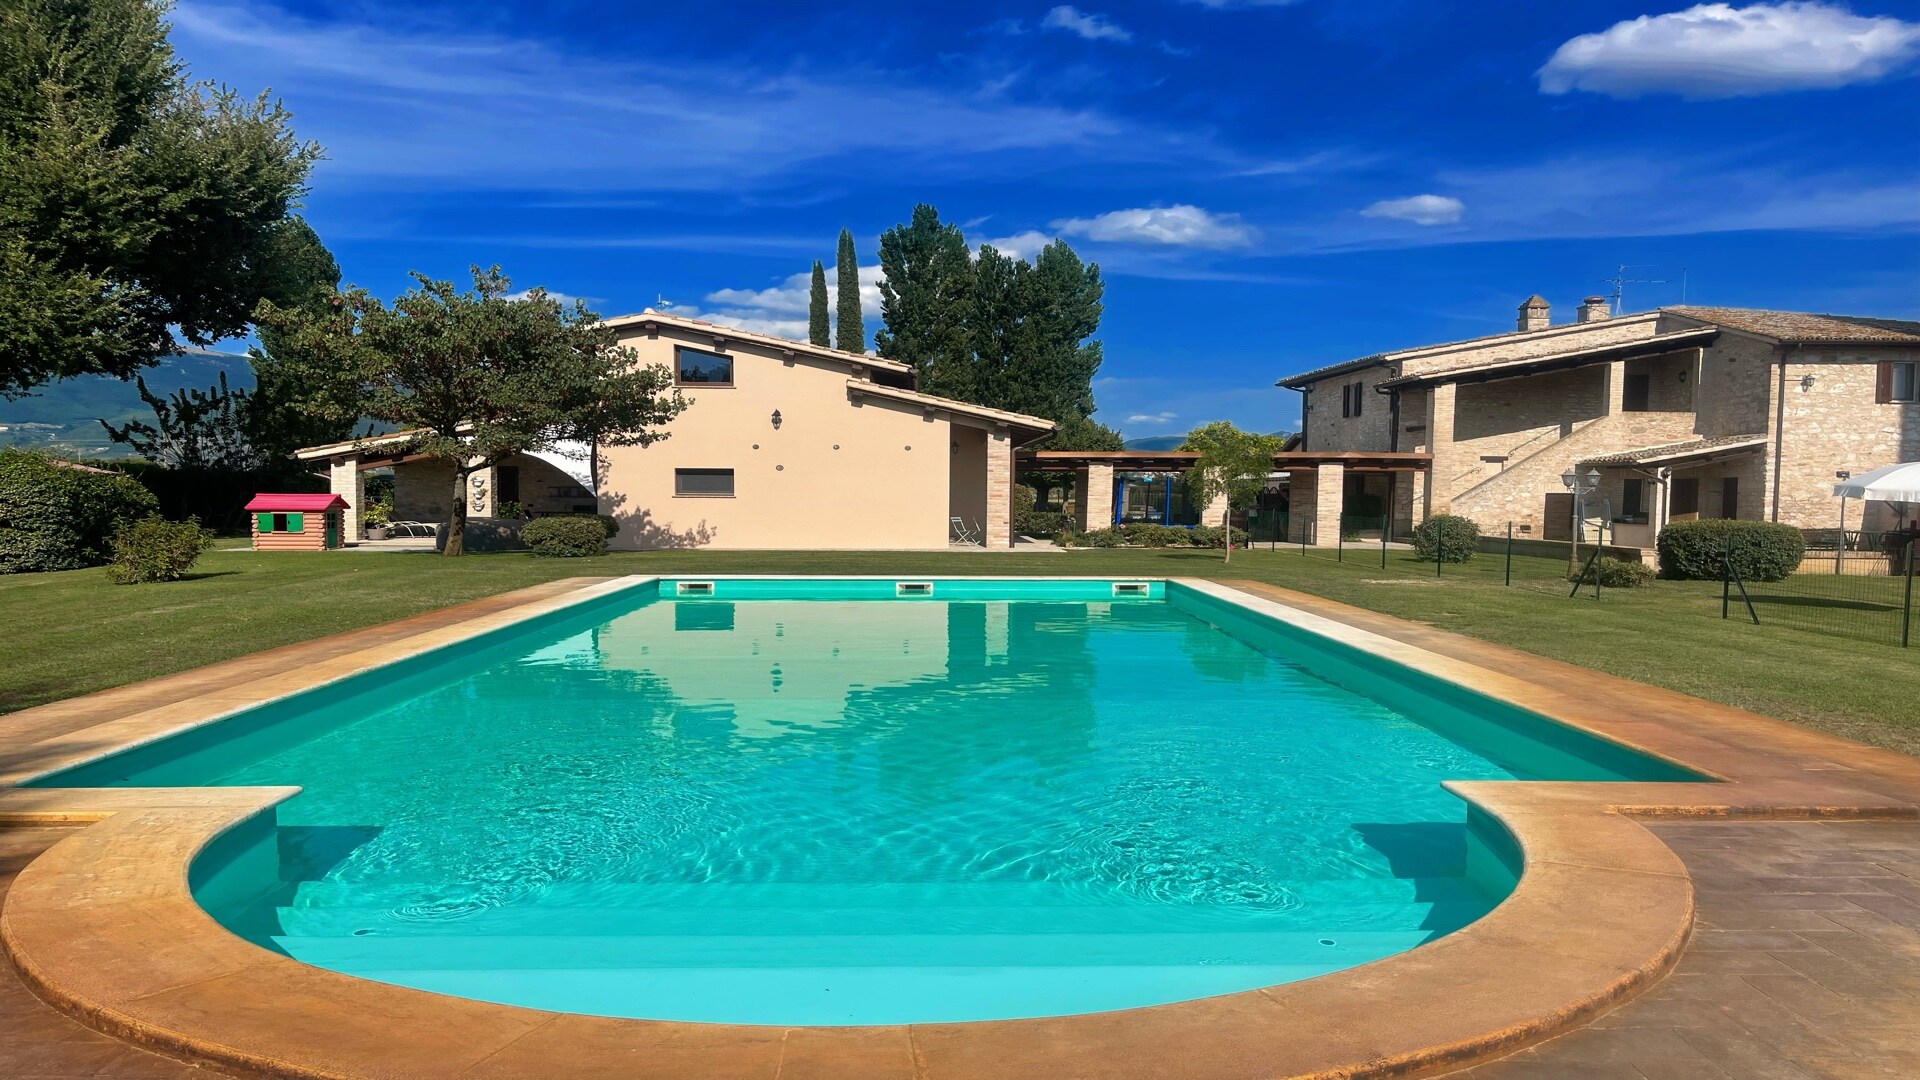 Property Image 1 - Spello By The Pool - Sleeps 11, Italy - Large private pool - Aircon - Wifi